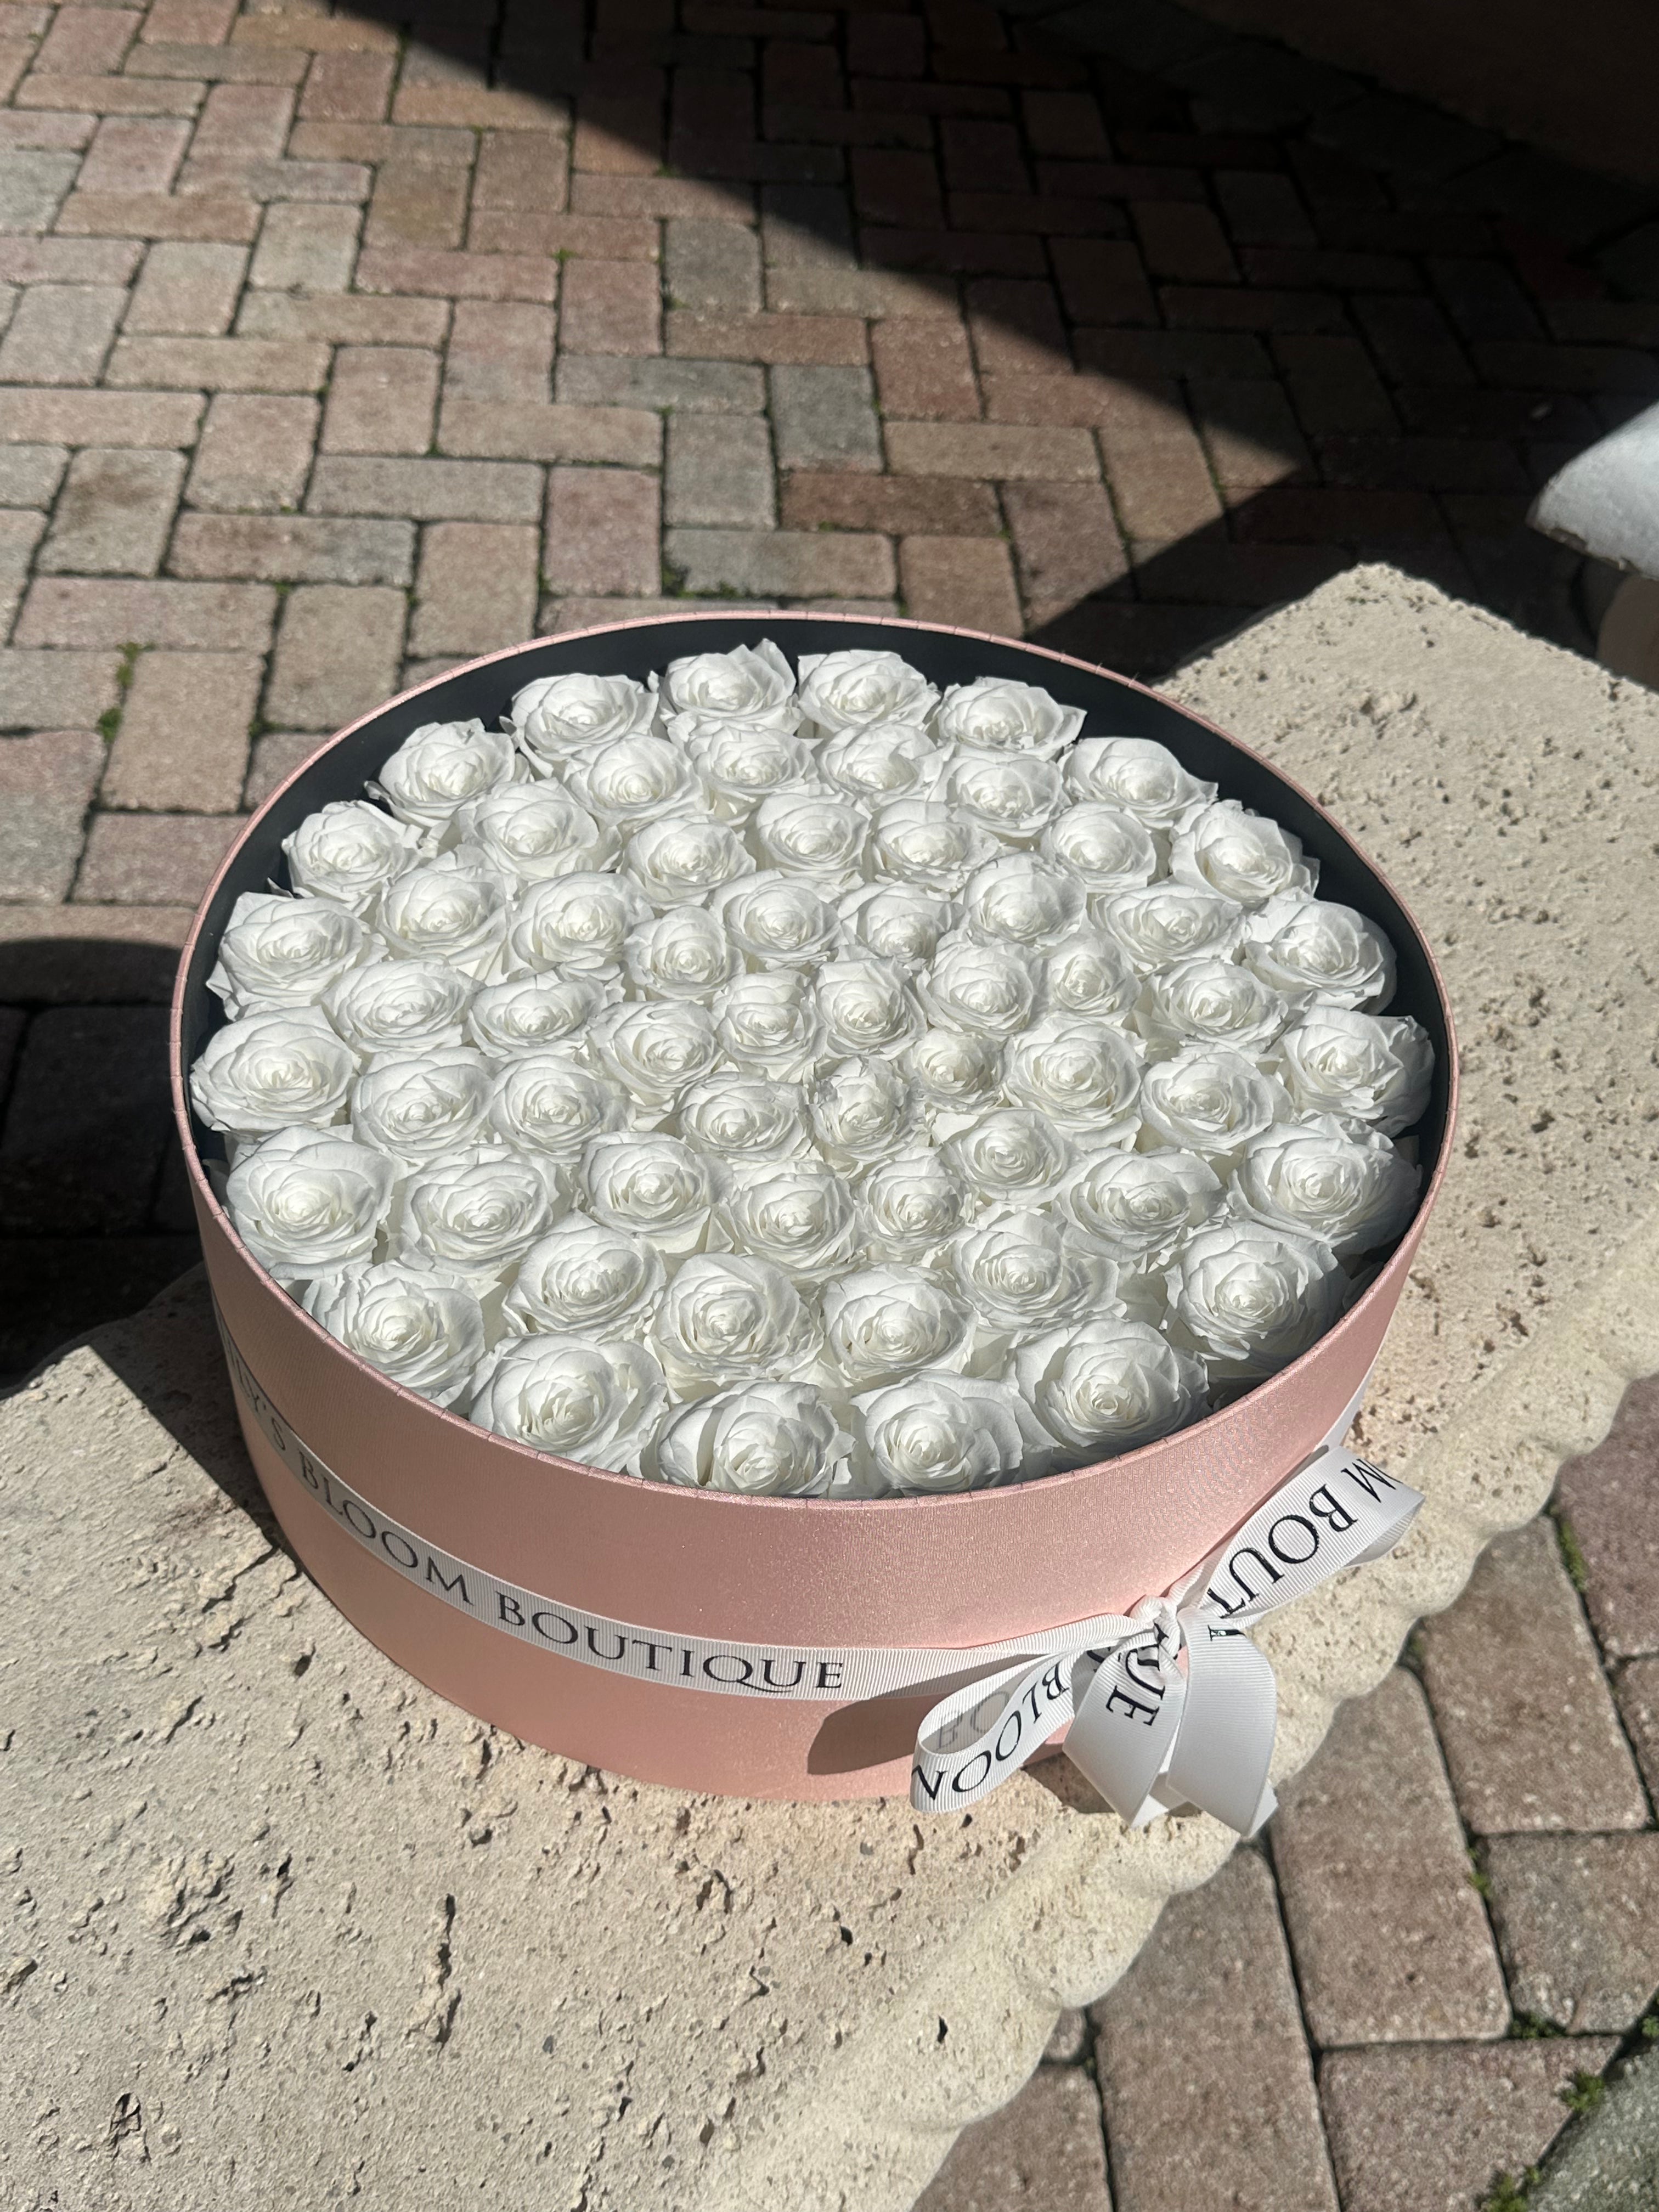 Round box of preserved roses on a concrete bench